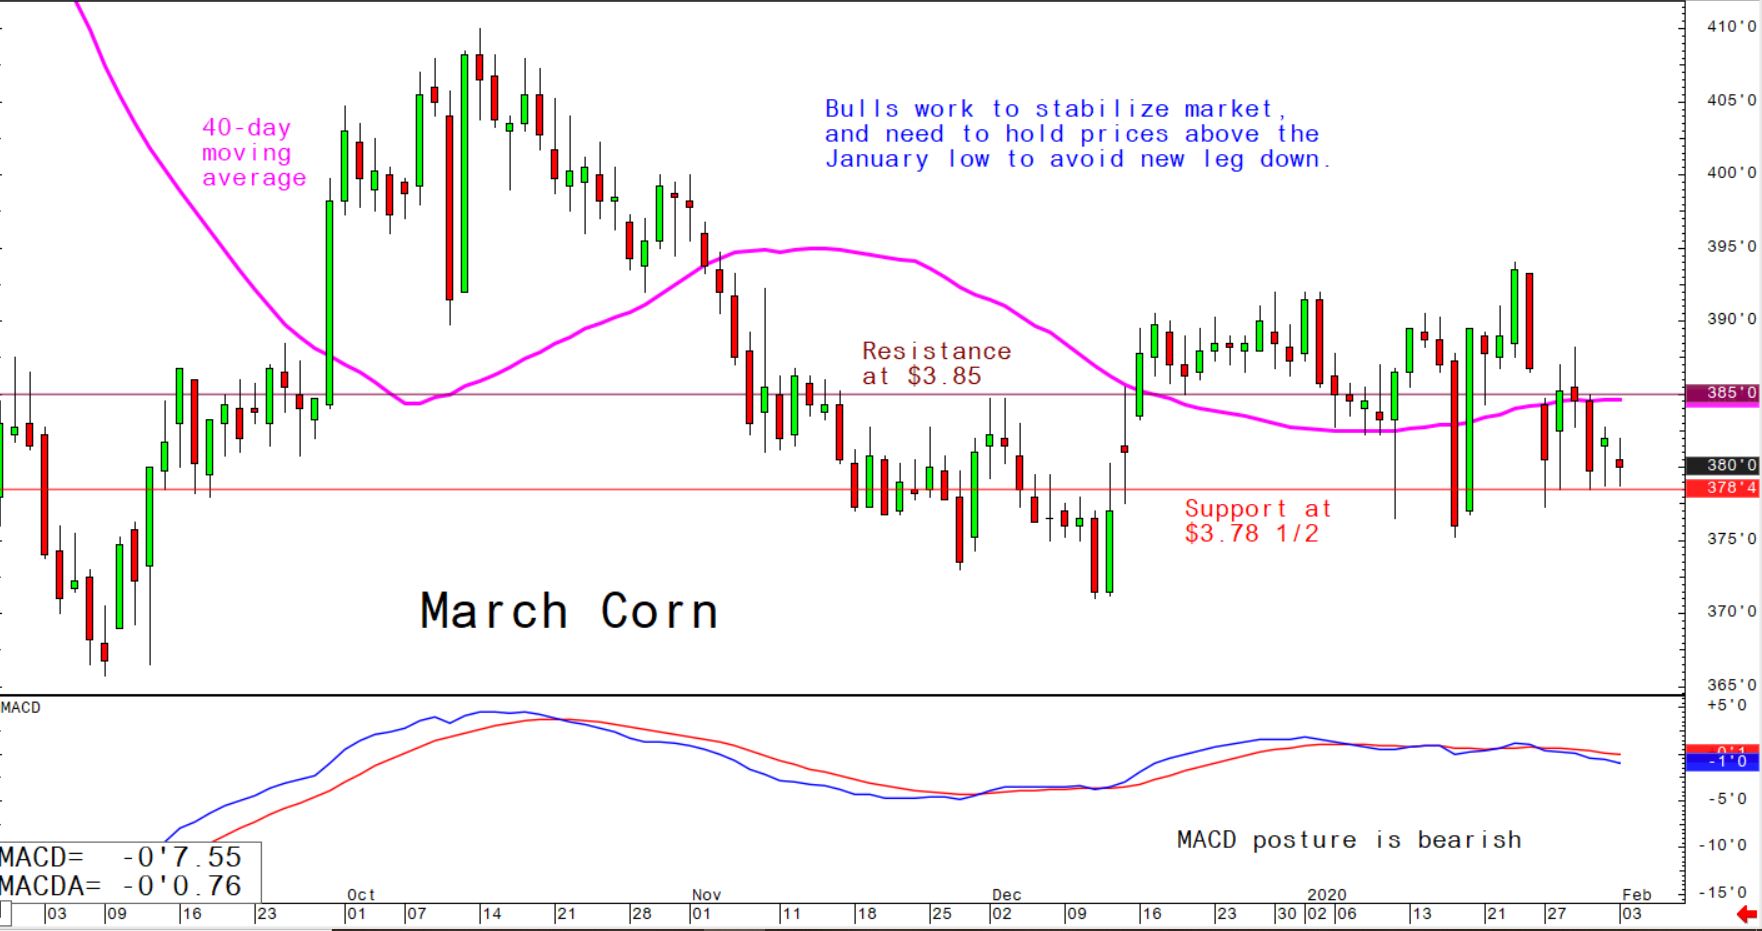 Bulls work to stabilise market and need to hold prices above the January low to avoid new leg down